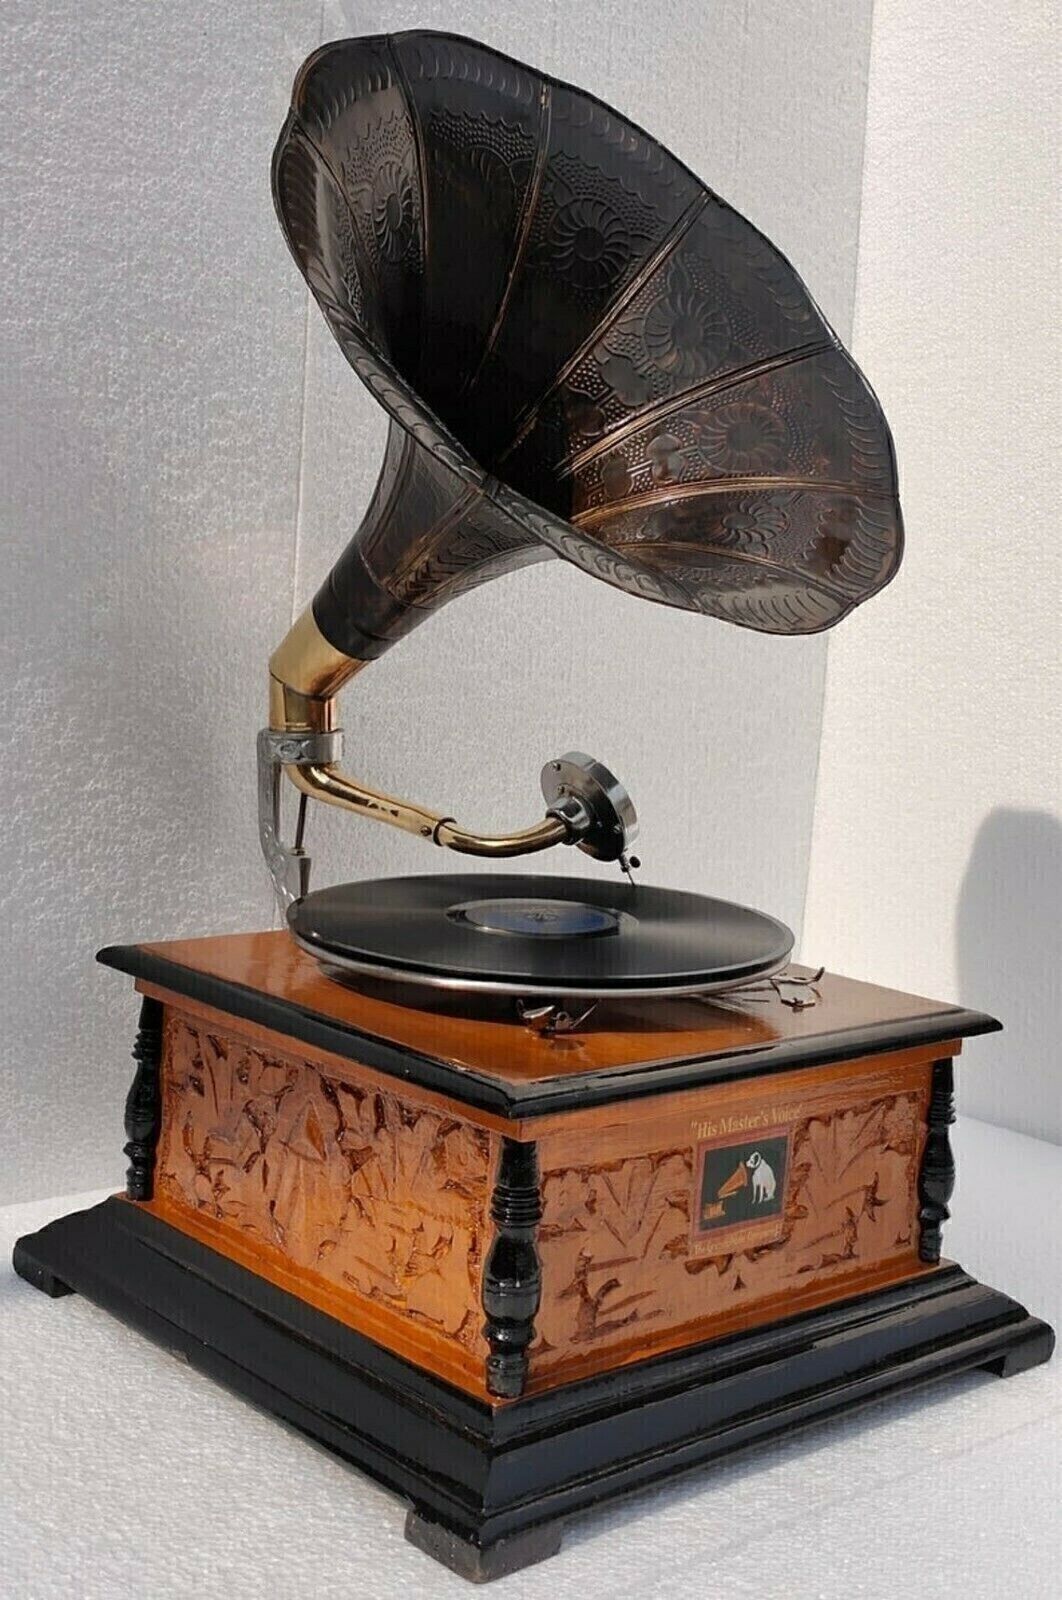 HMV Vintage Gramophone Phonograph Working Antique Audio ,win-up record players